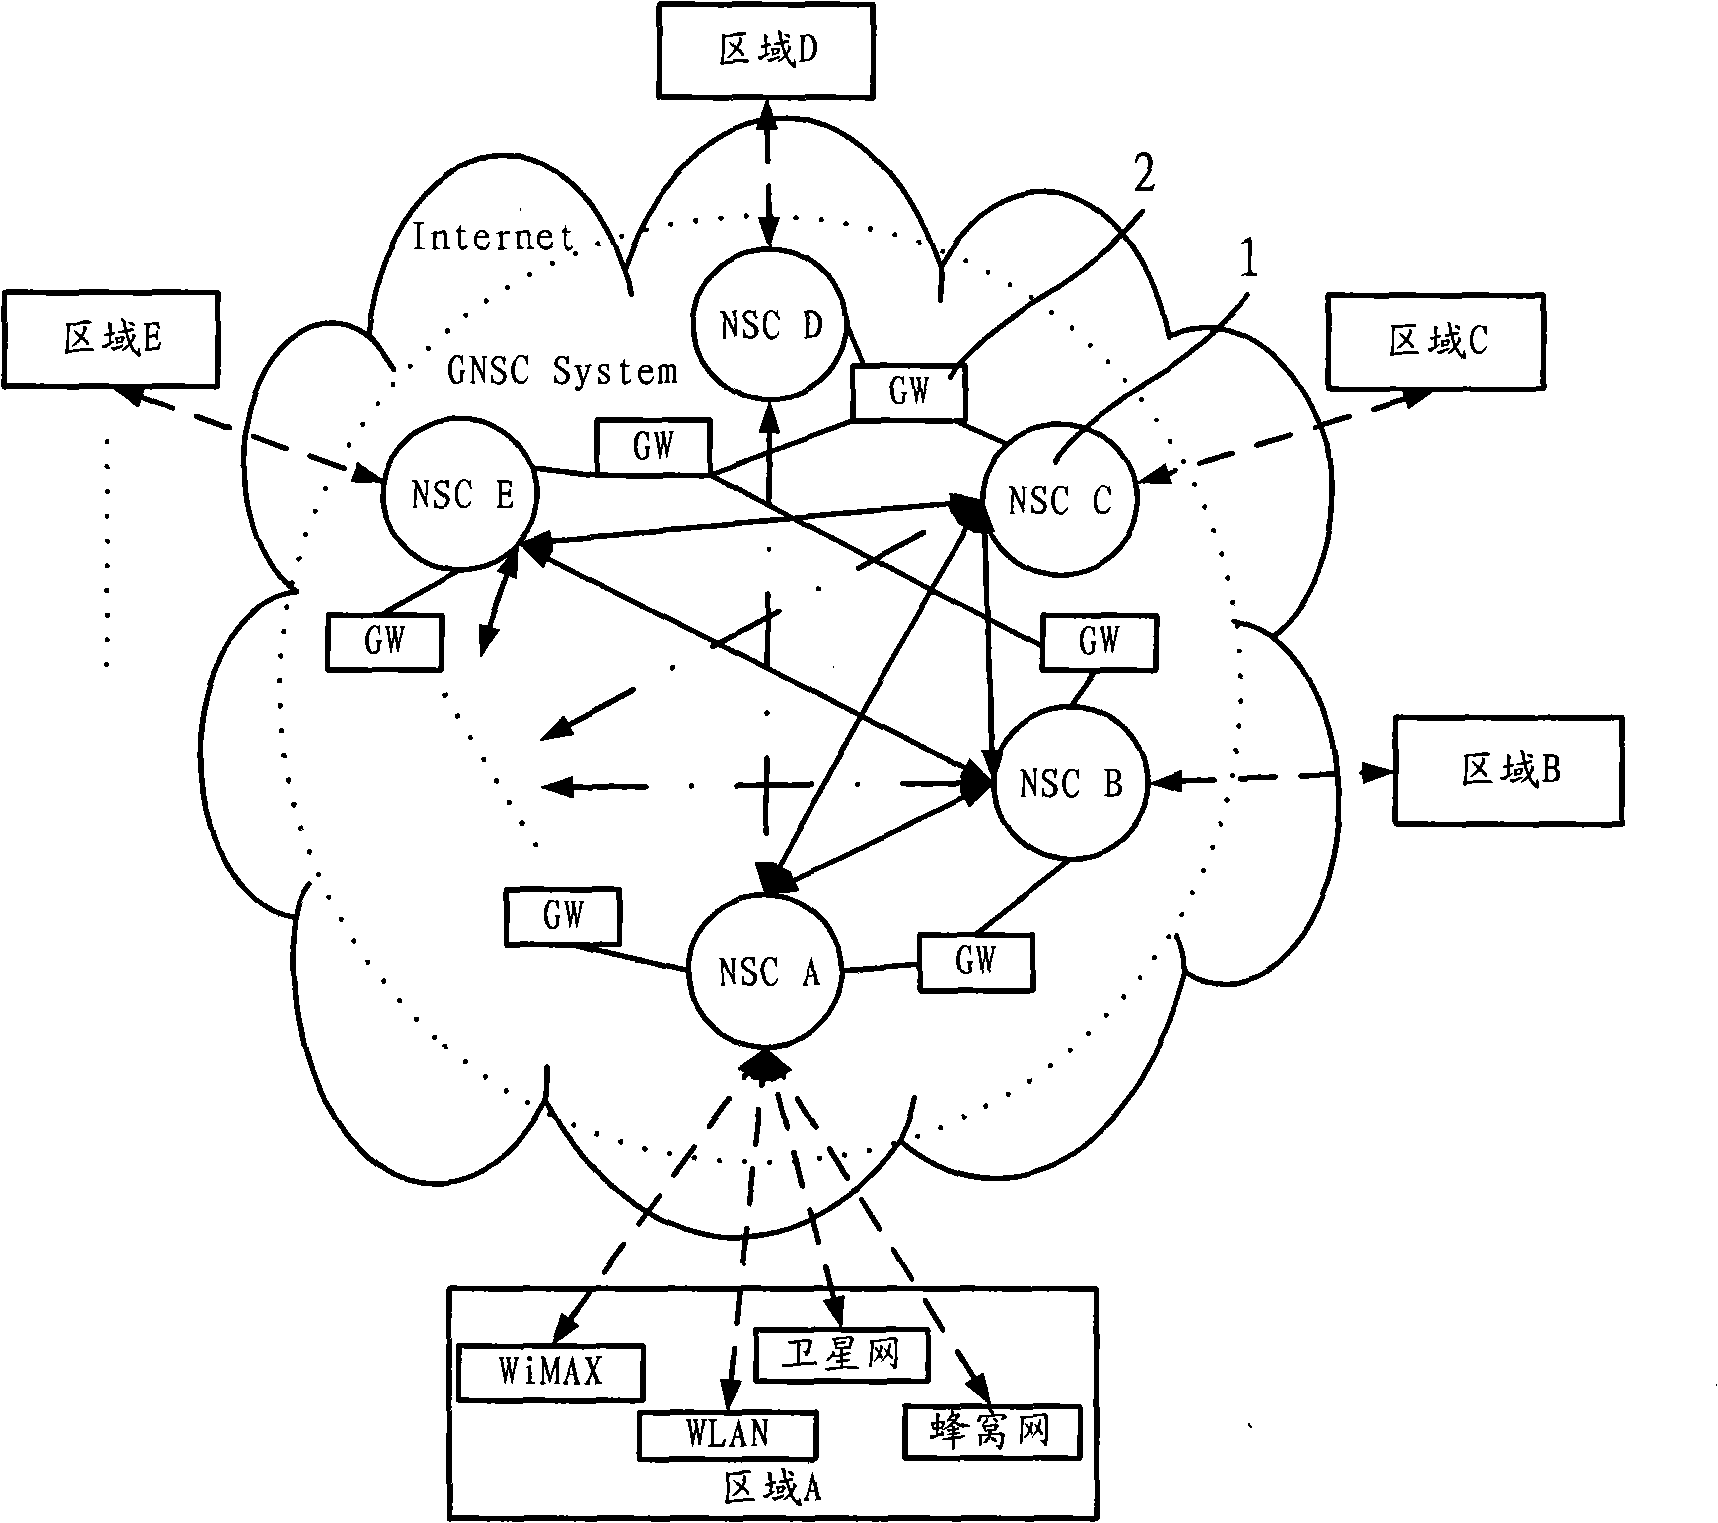 Interaction method between space network and ground network and communication protocol gateway